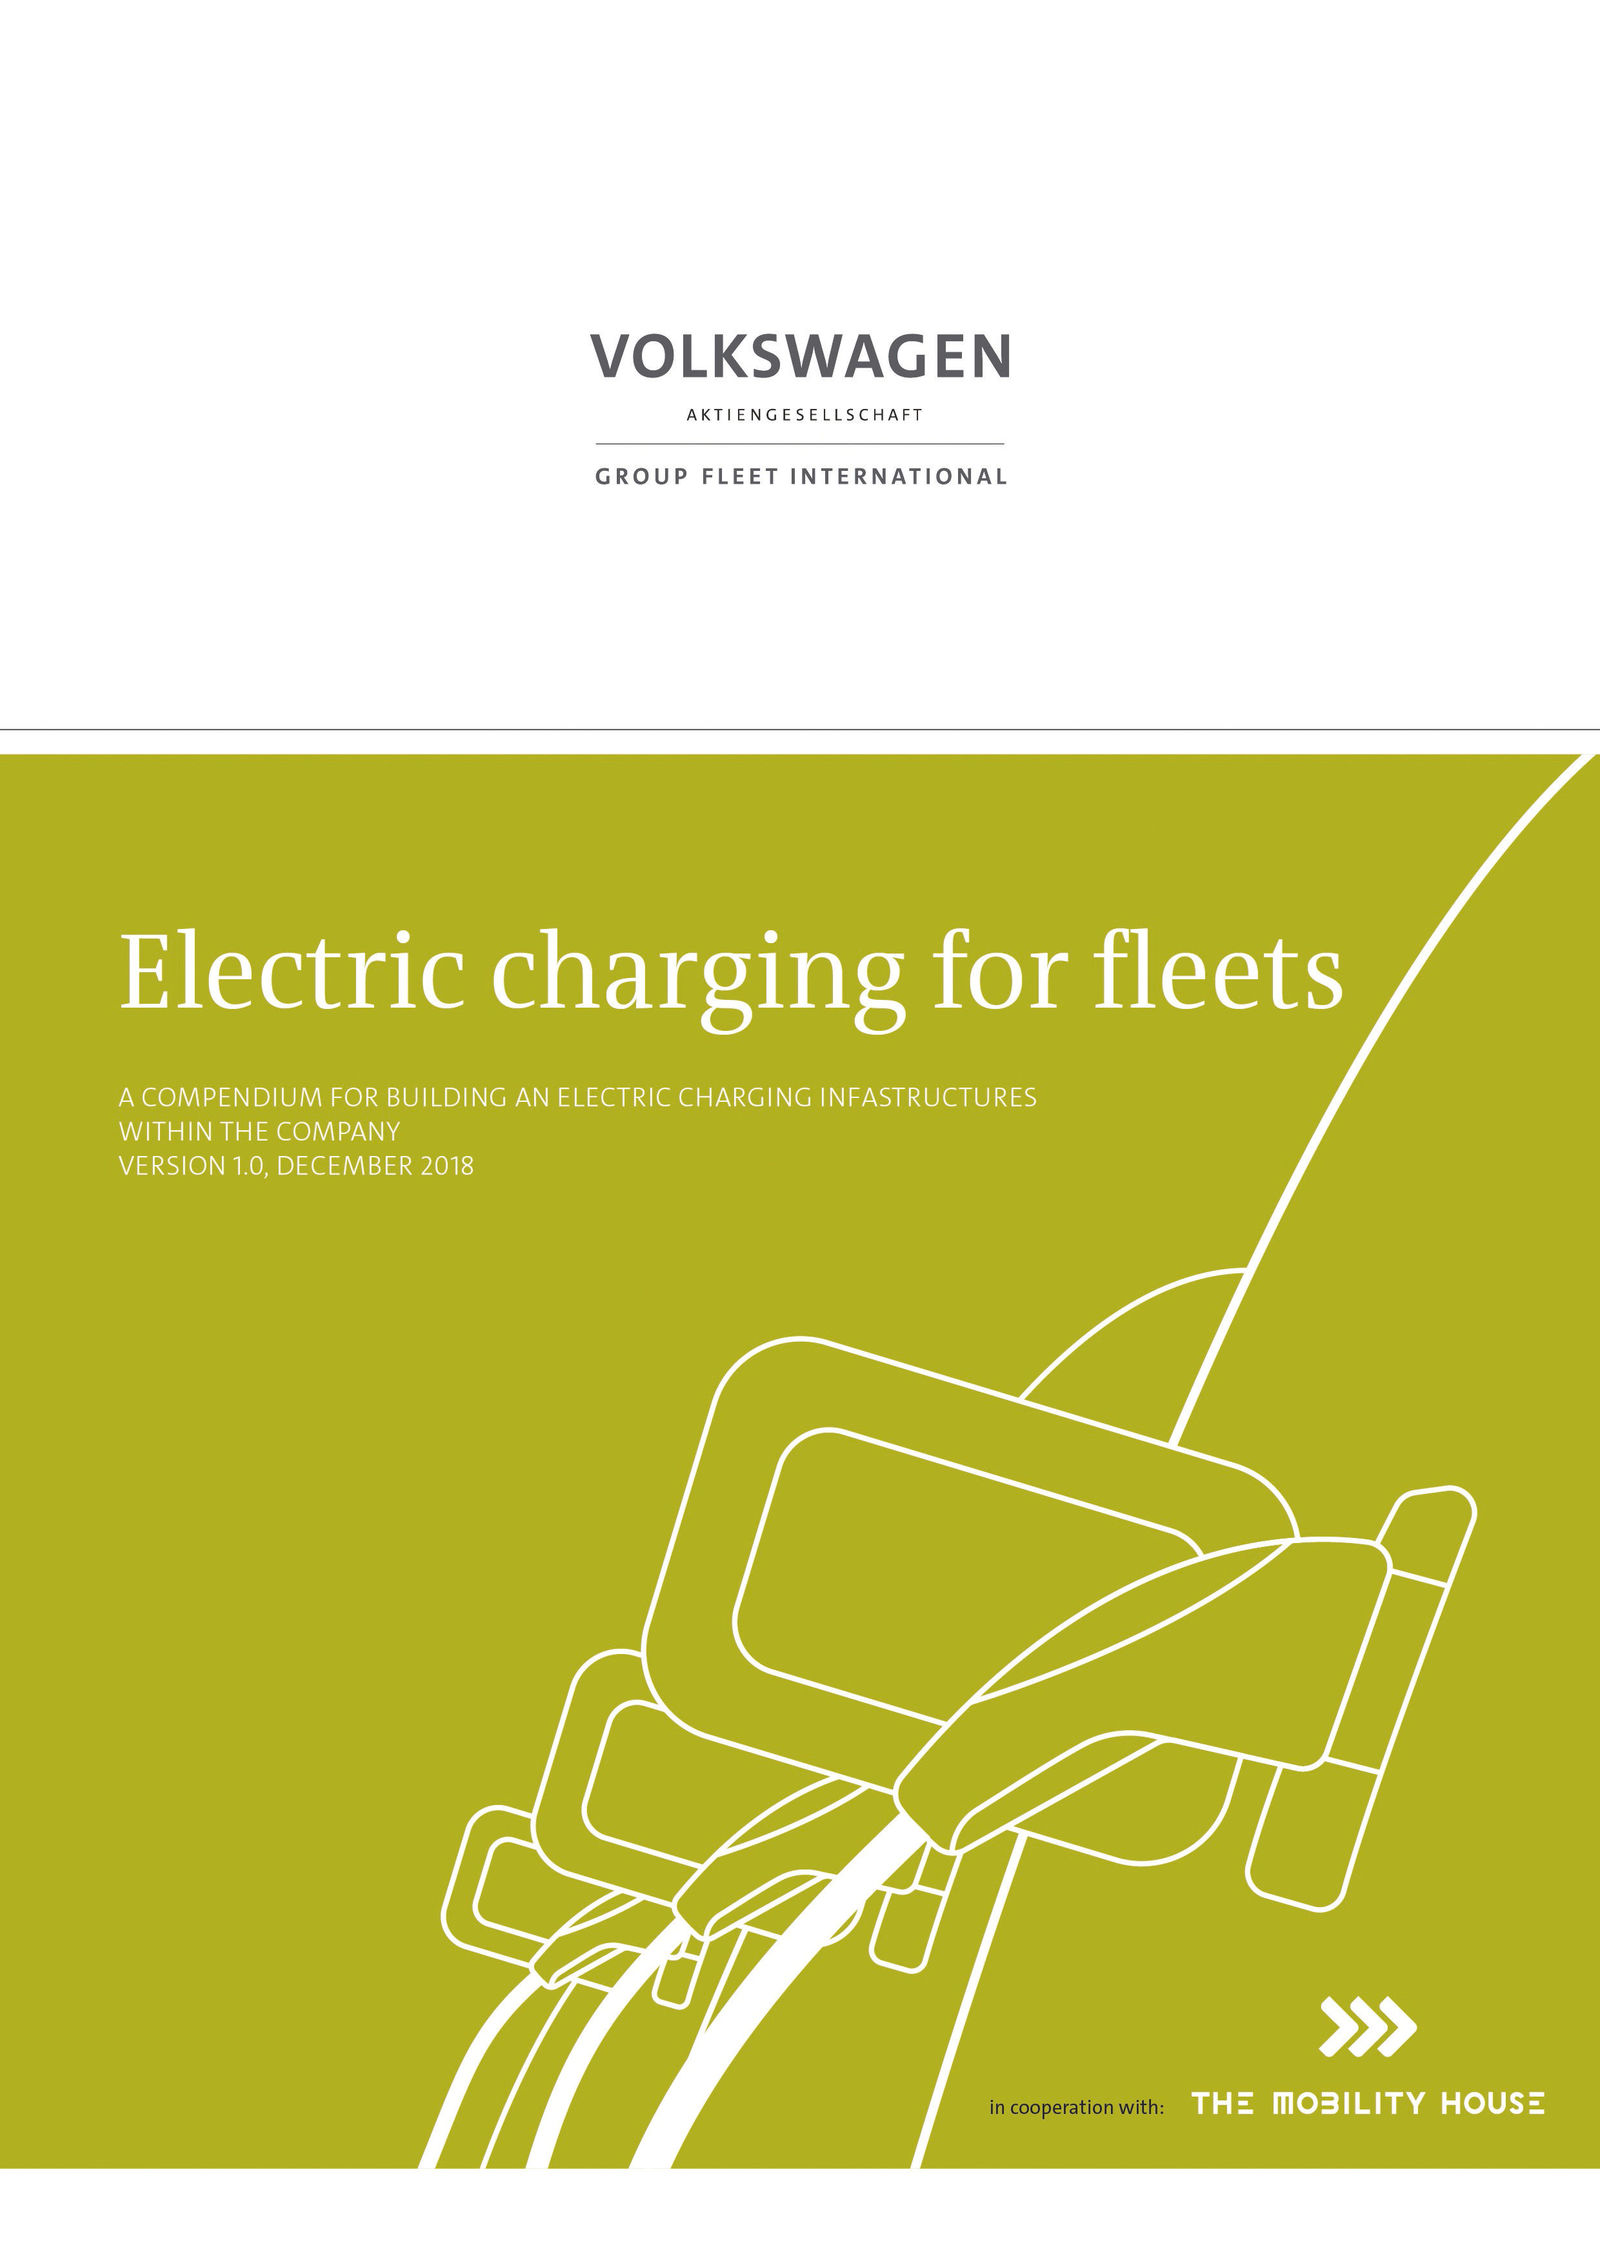 Building EV charging infrastructures within companies